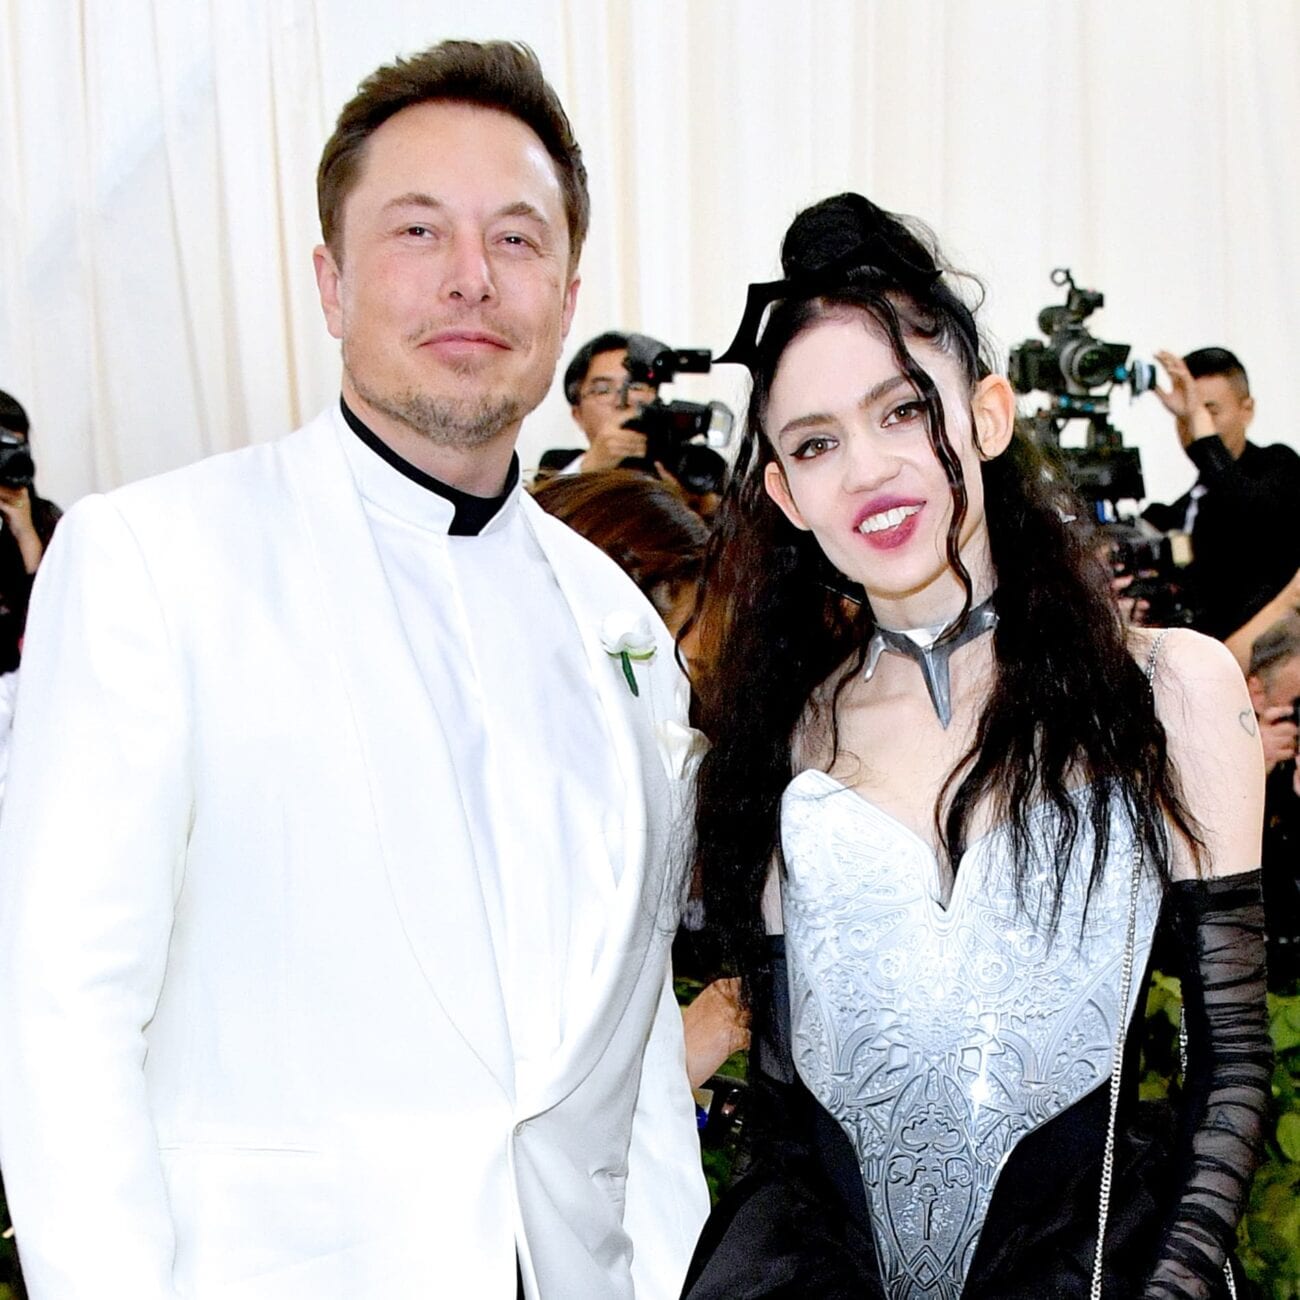 Grimes just responded to some of her critics online. Discover what the singer had to say about Elon Musk funding her music career.